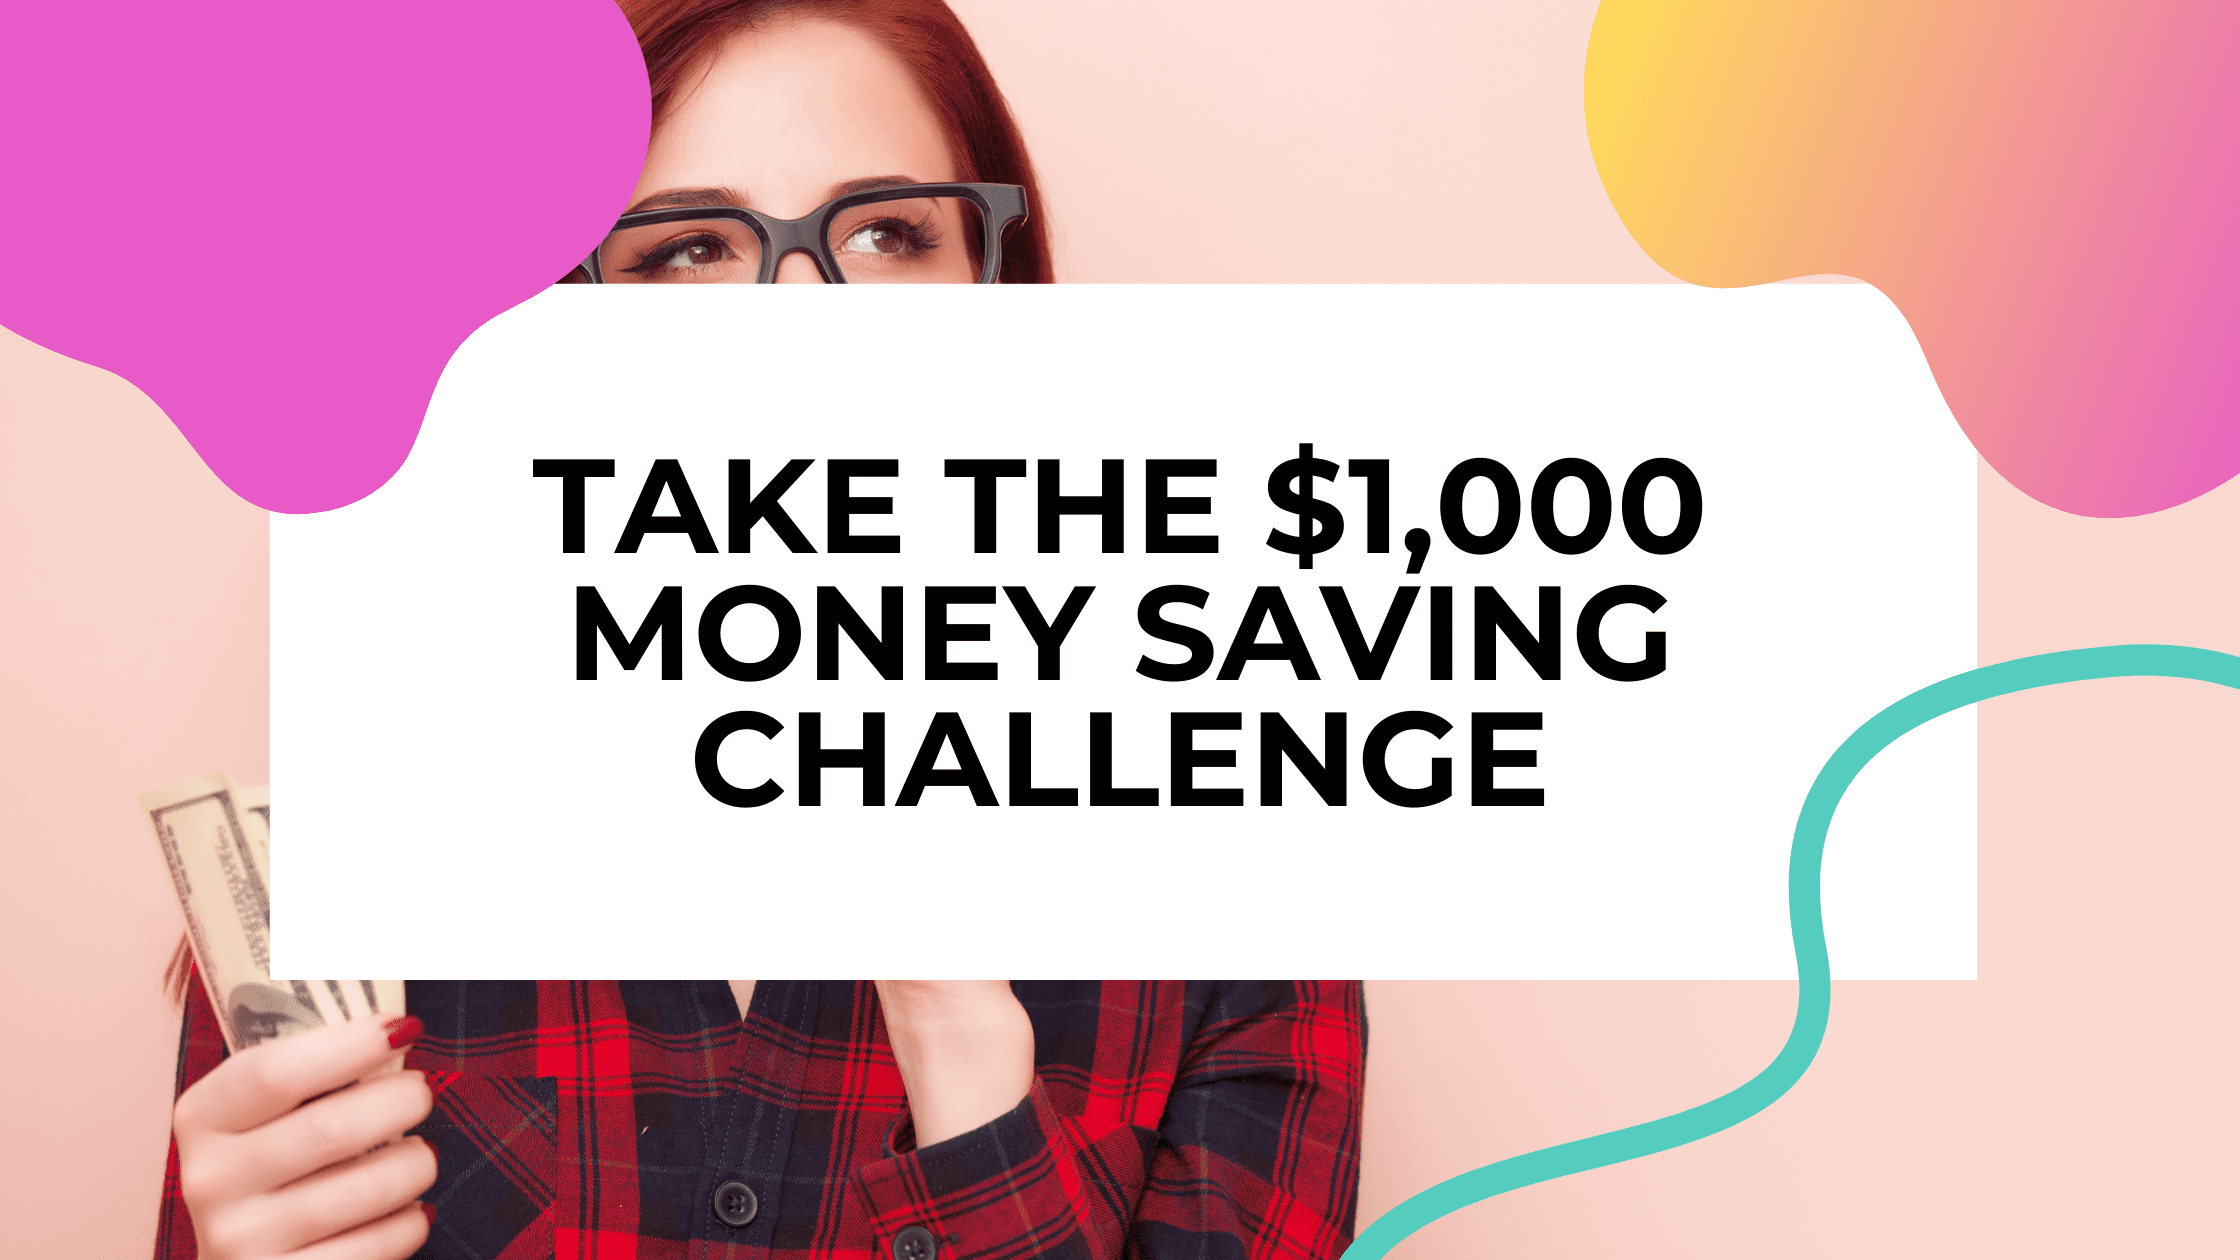 money saving challenge featured image with person holding cash against a pink background with title text that reads take the $1,000 money saving challenge